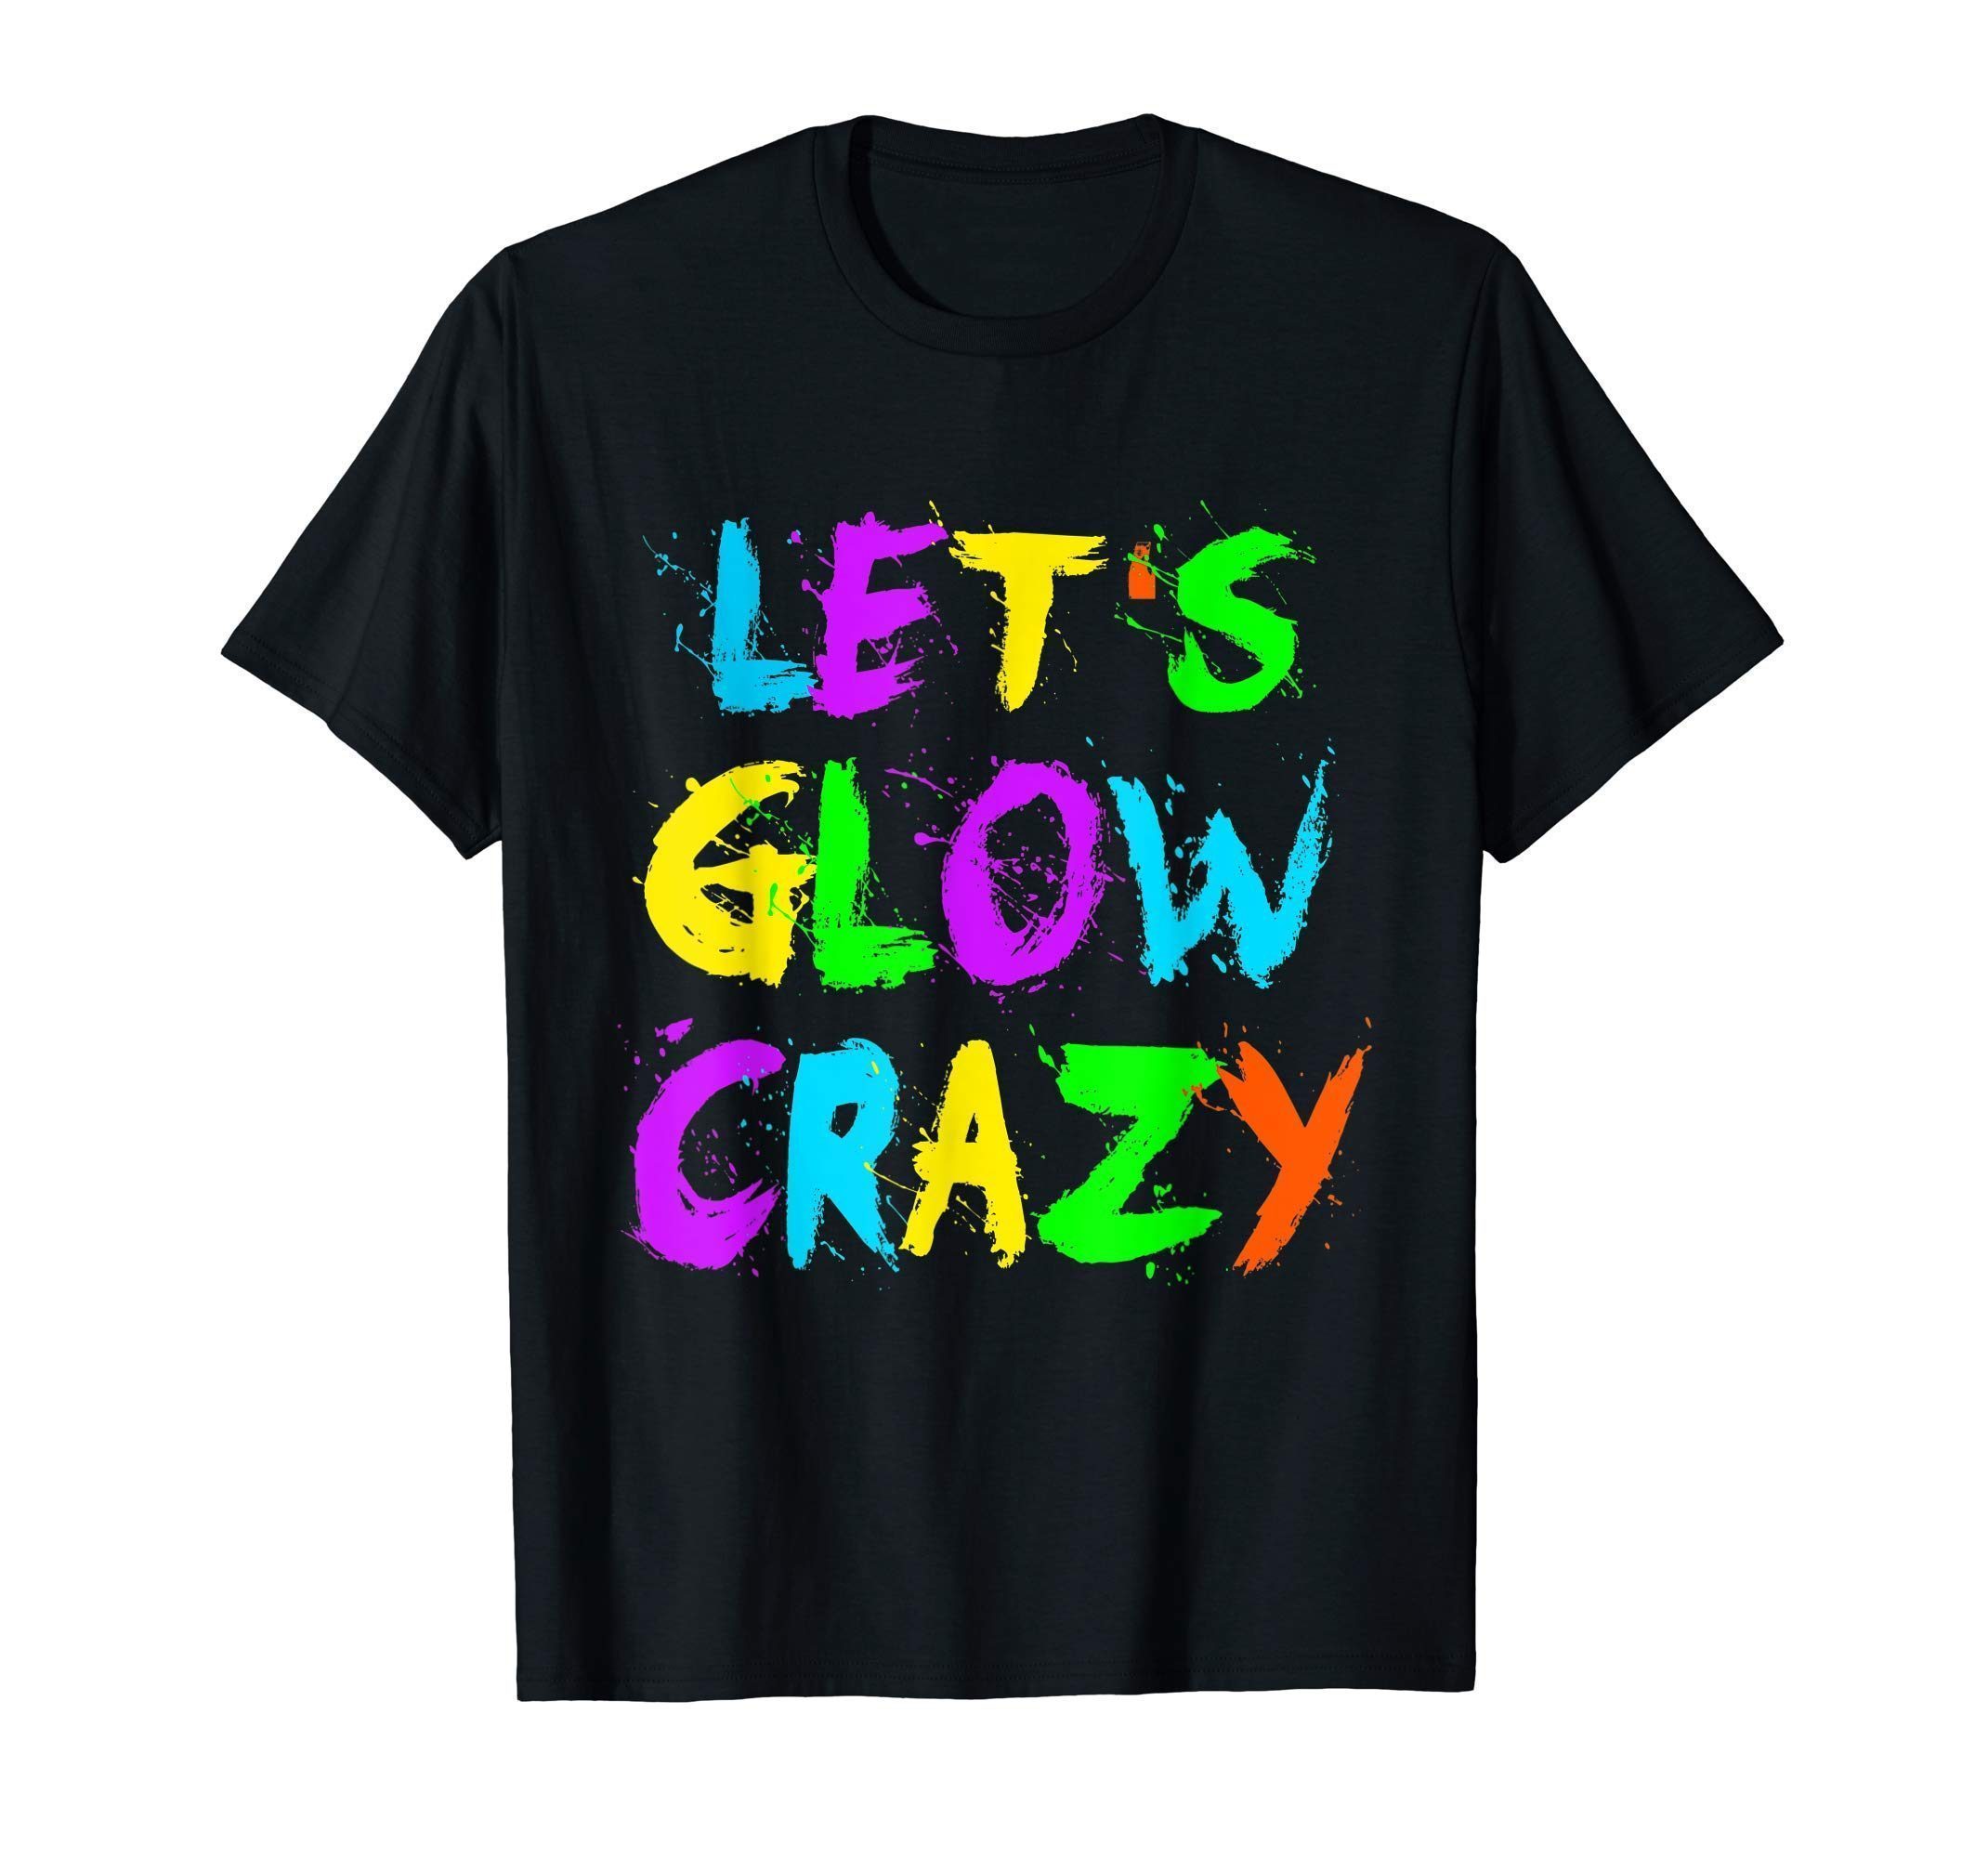 Let S Glow Crazy Tee Shirt Retro Neon Party Rave Color Tee Reviewshirts Office